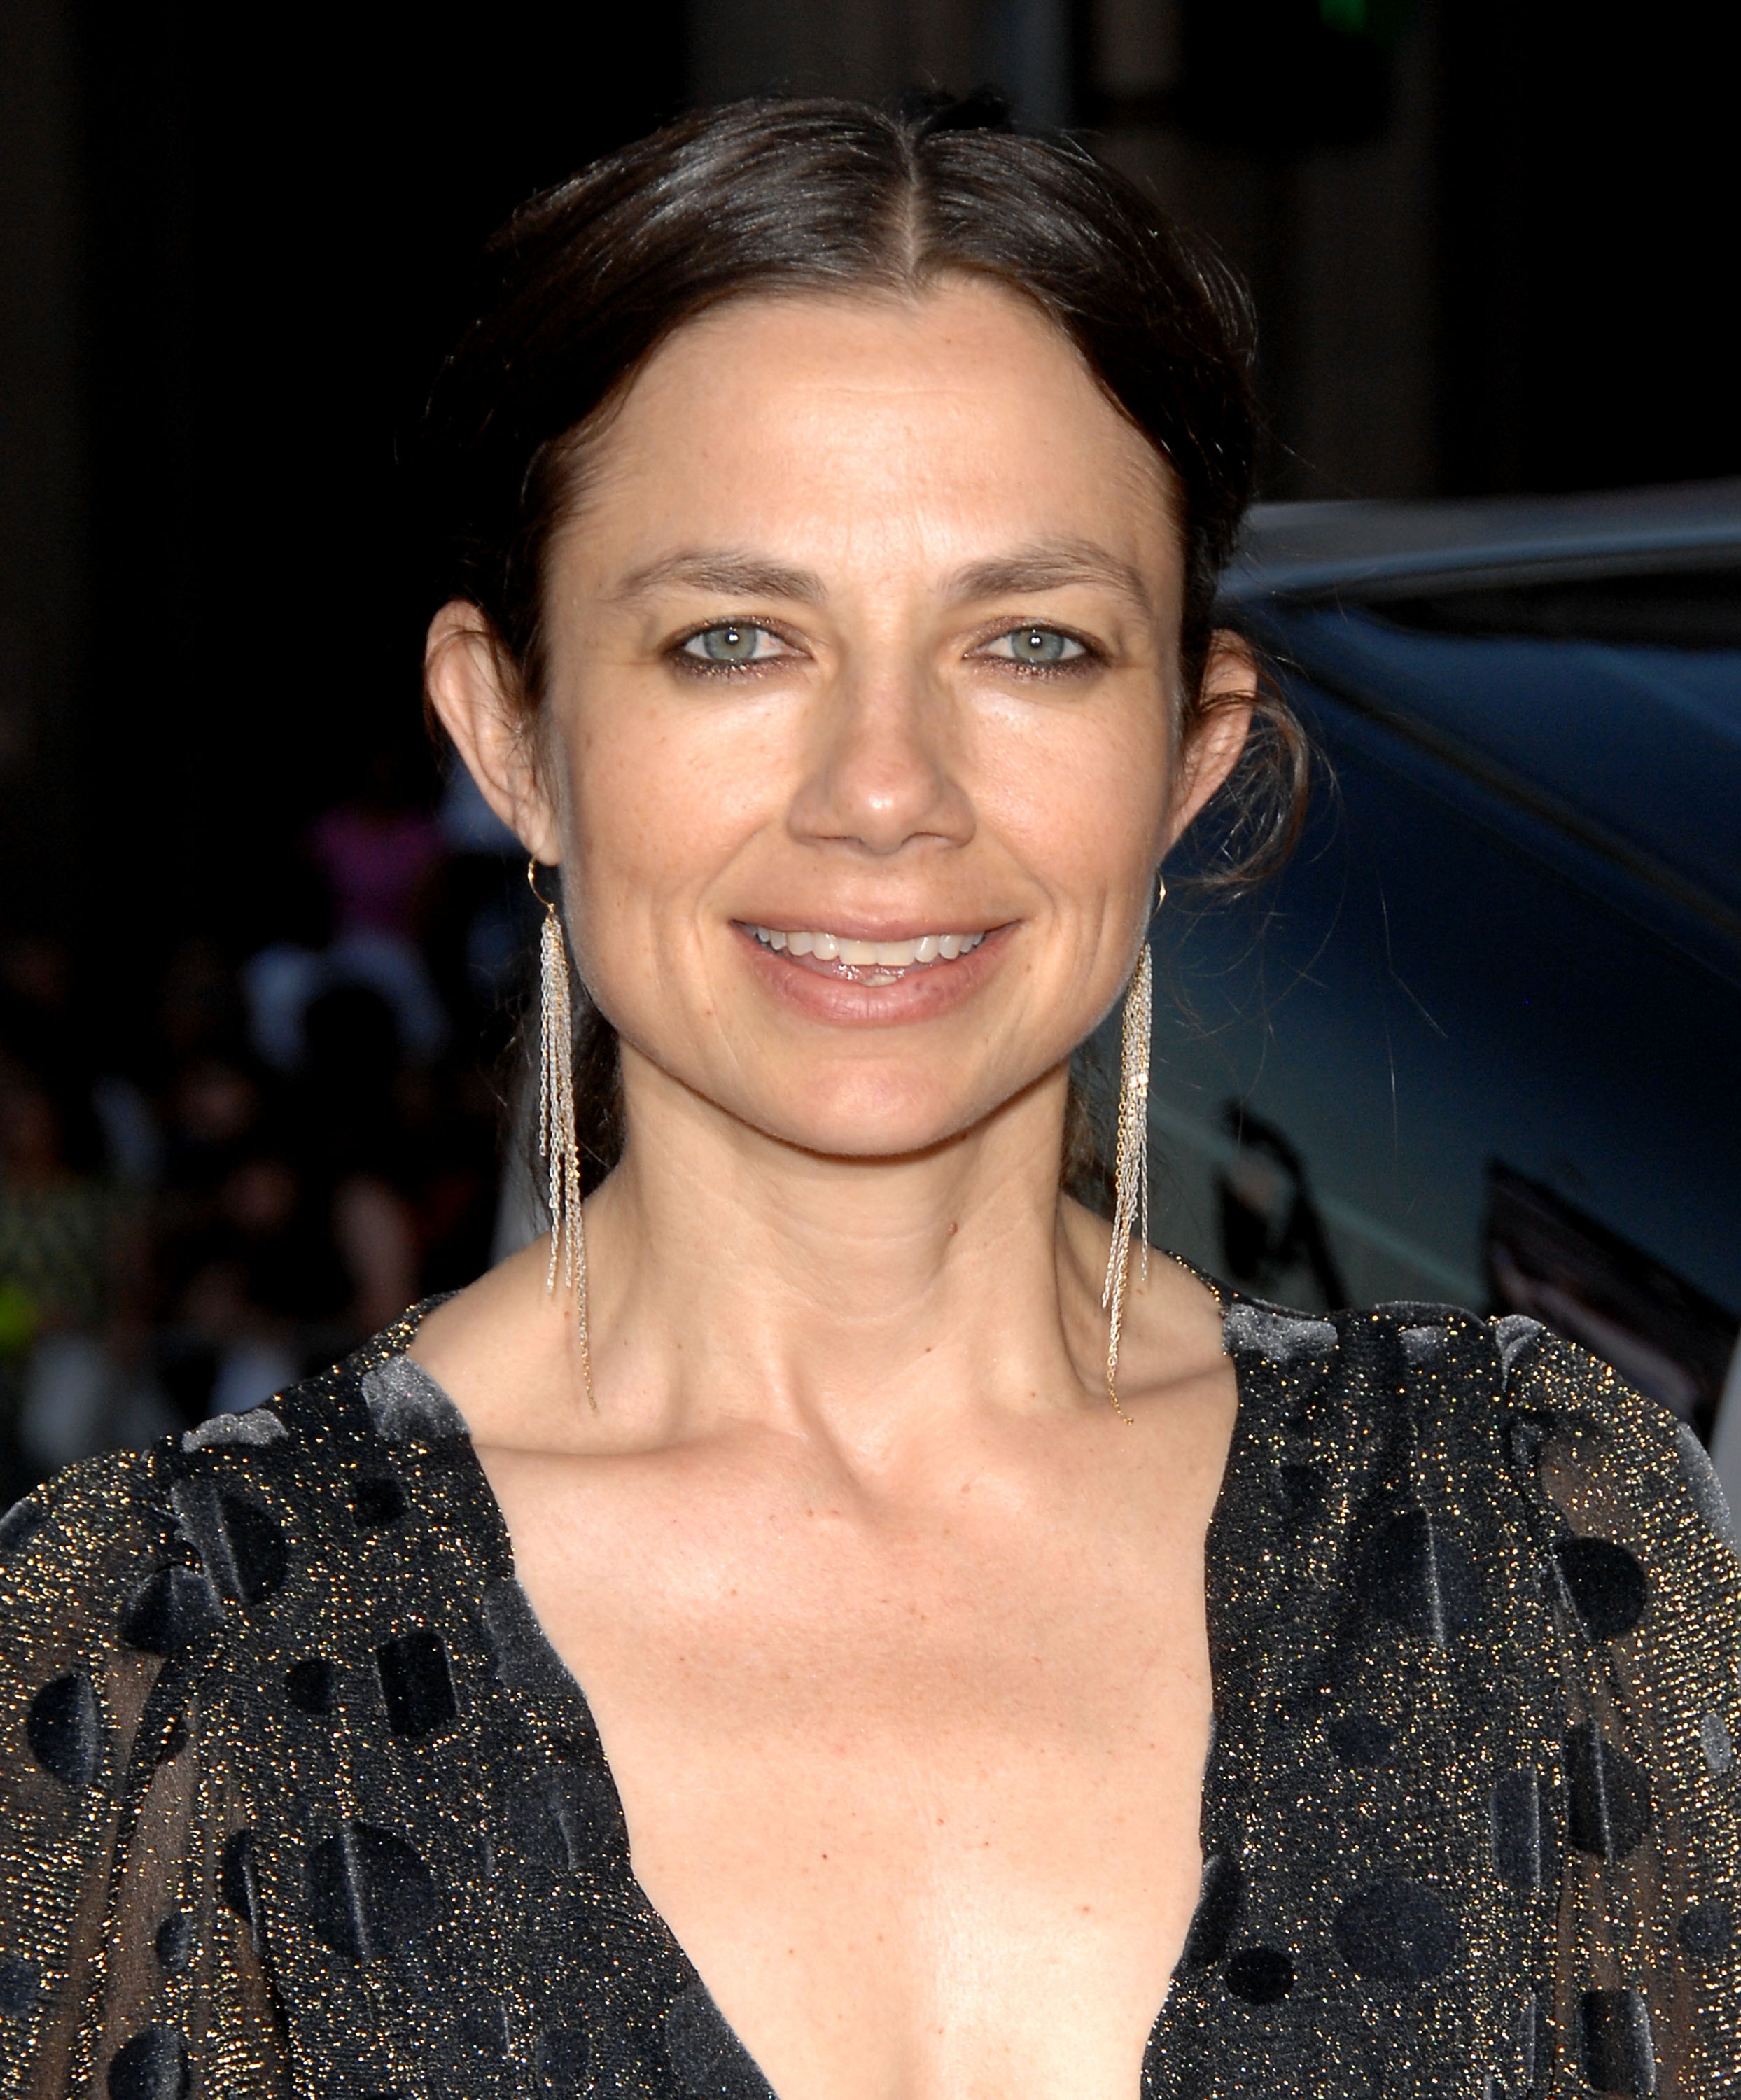 Justine Bateman during the "Hancock" on June 30, 2008  | Source: Getty Images